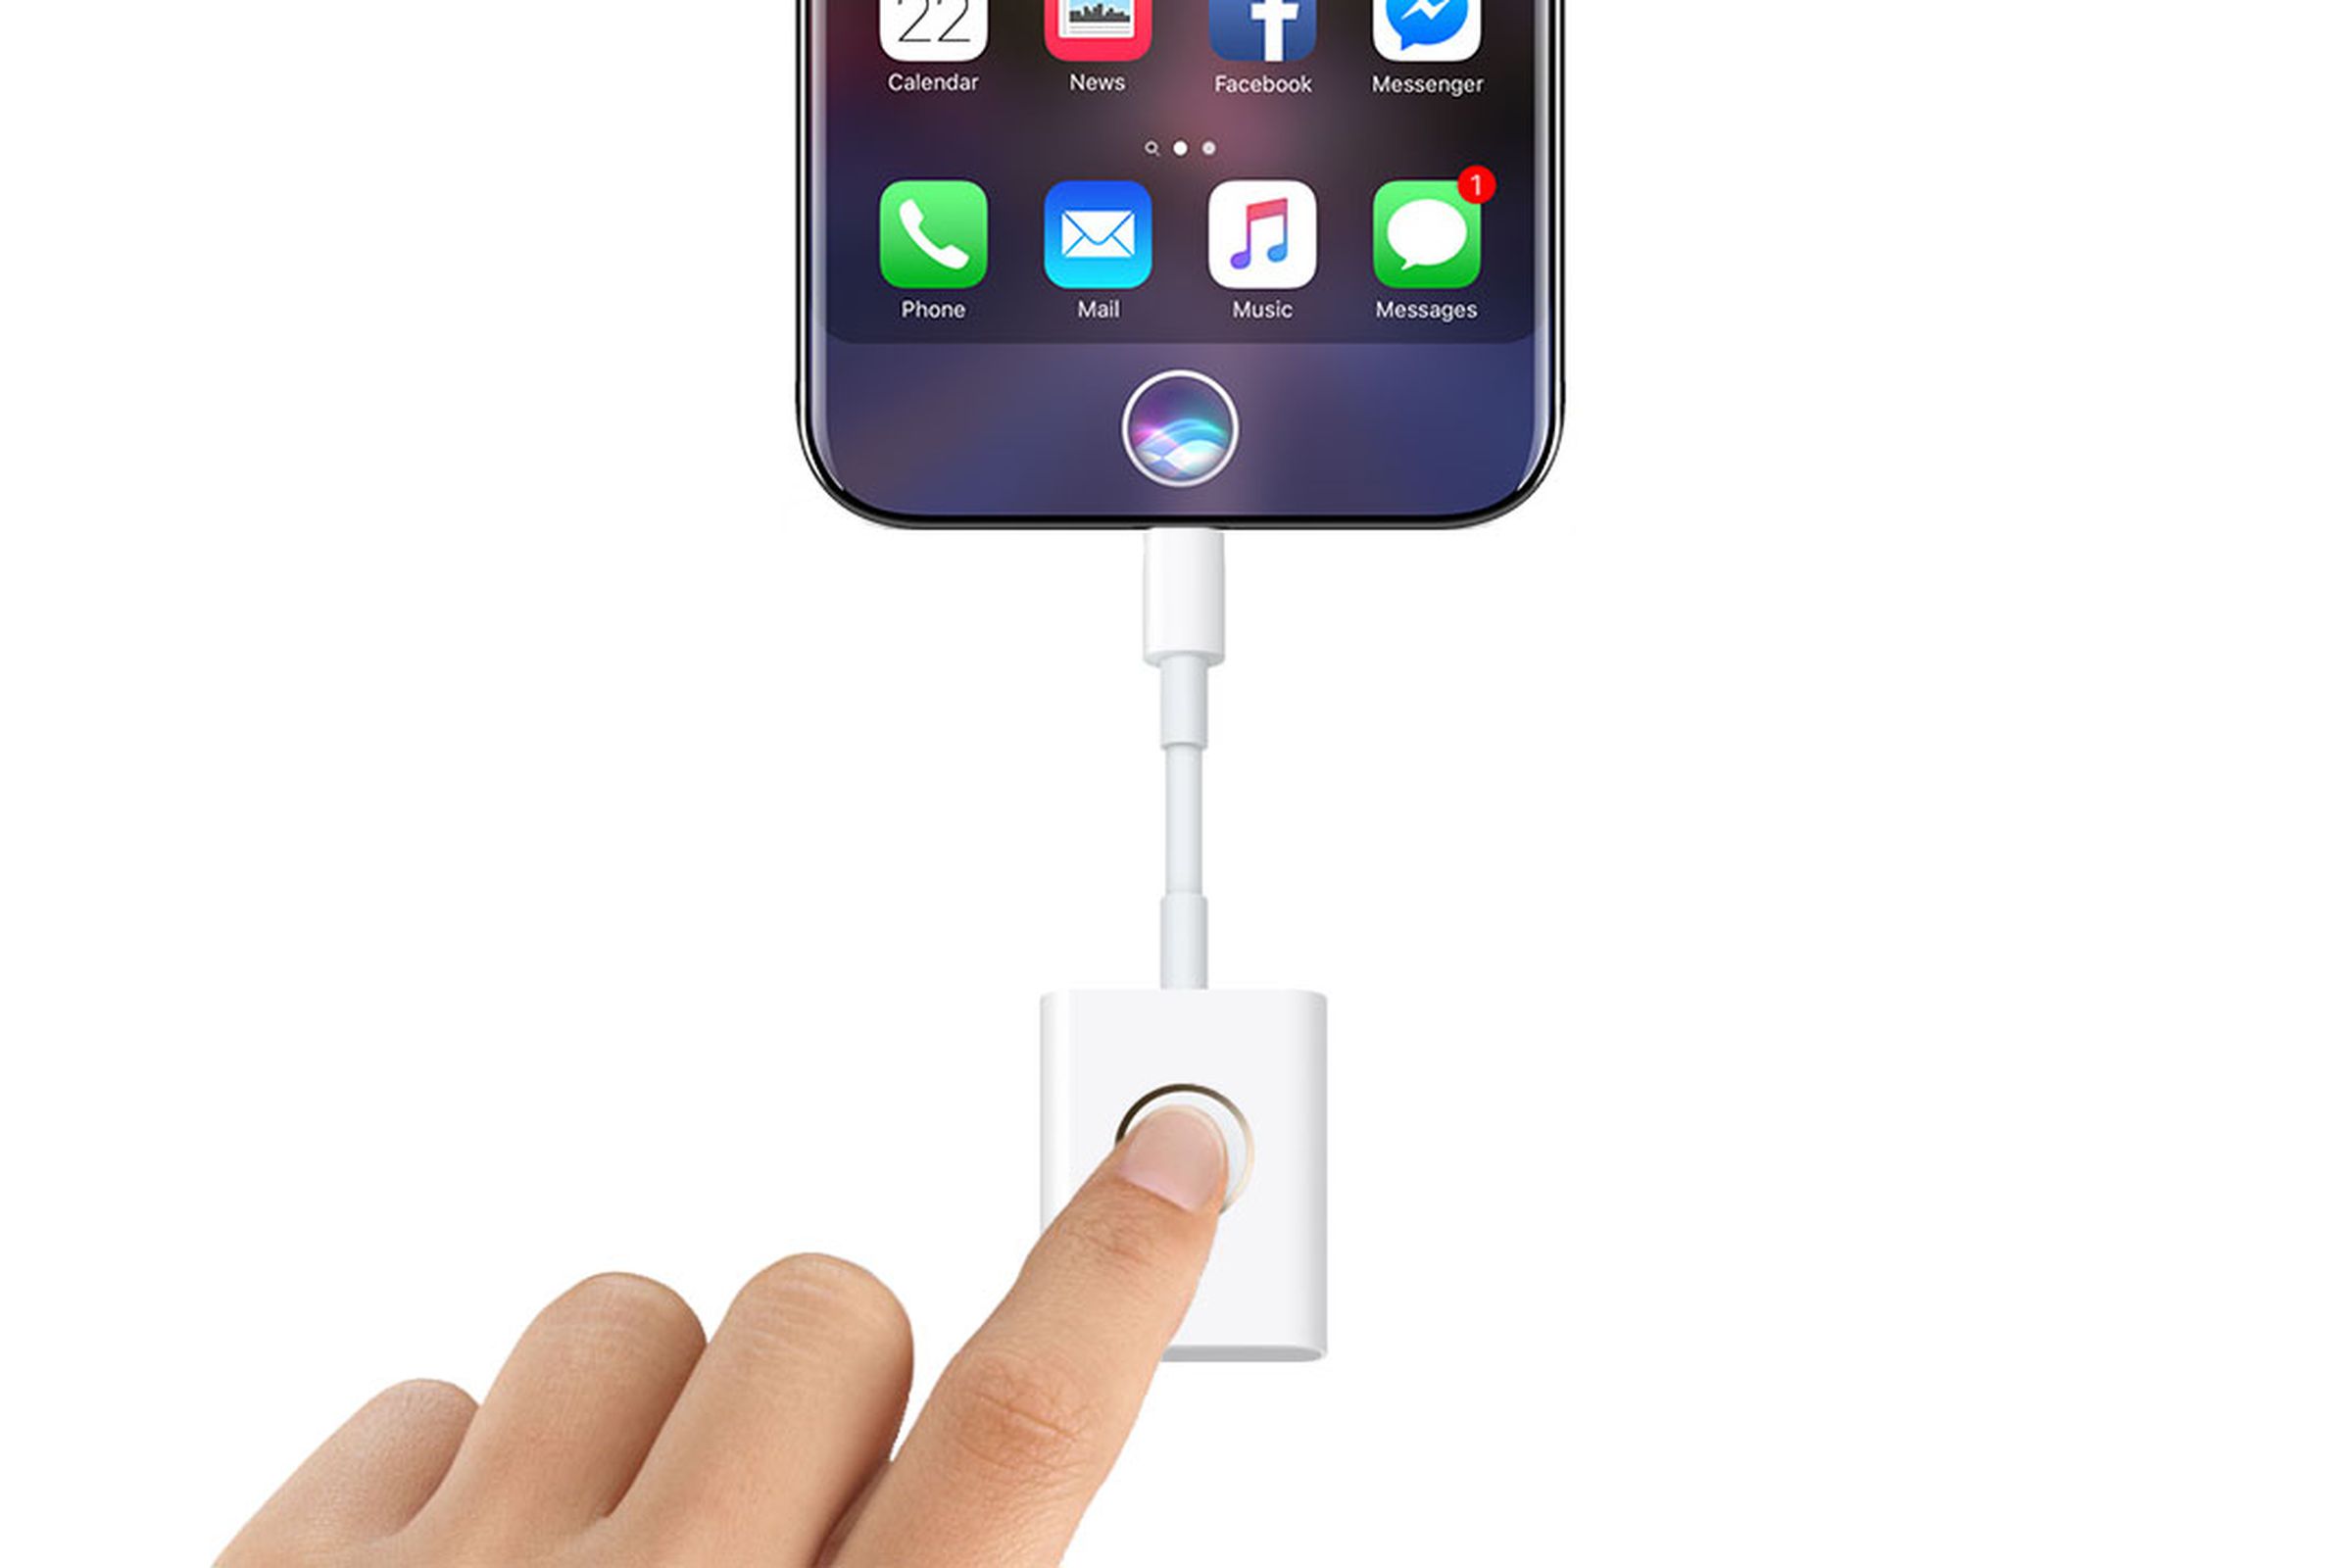 I used to think that an Apple dongle like this could never exist